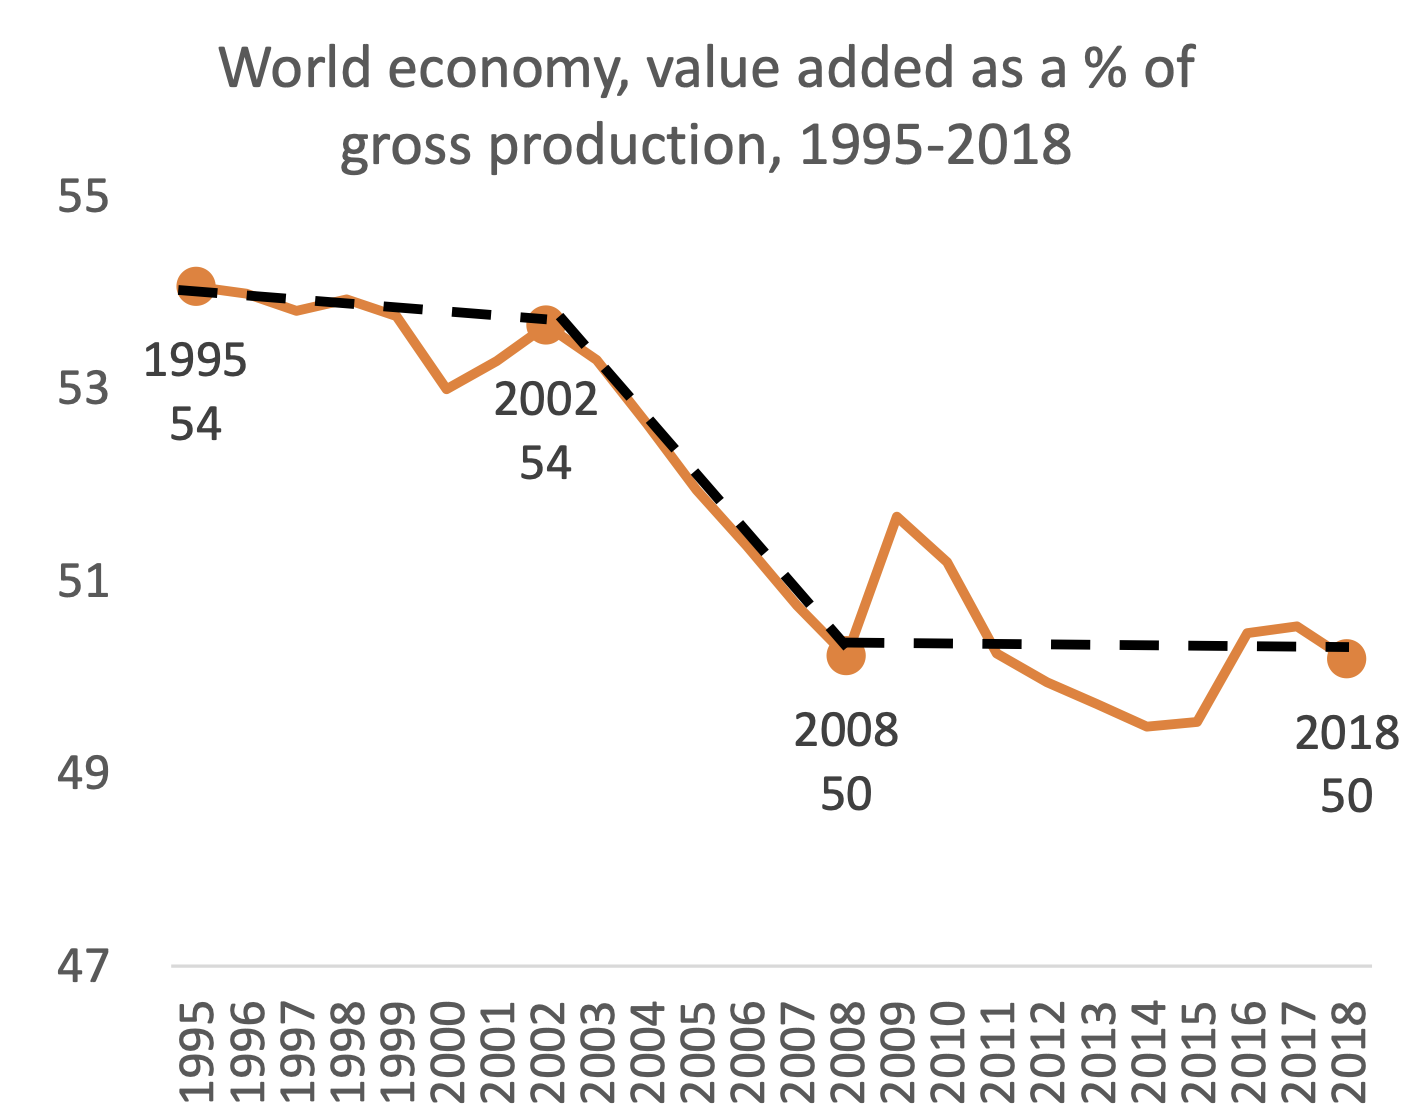 Figure 3 The ratio of world value added to gross output (%), 1995-2018